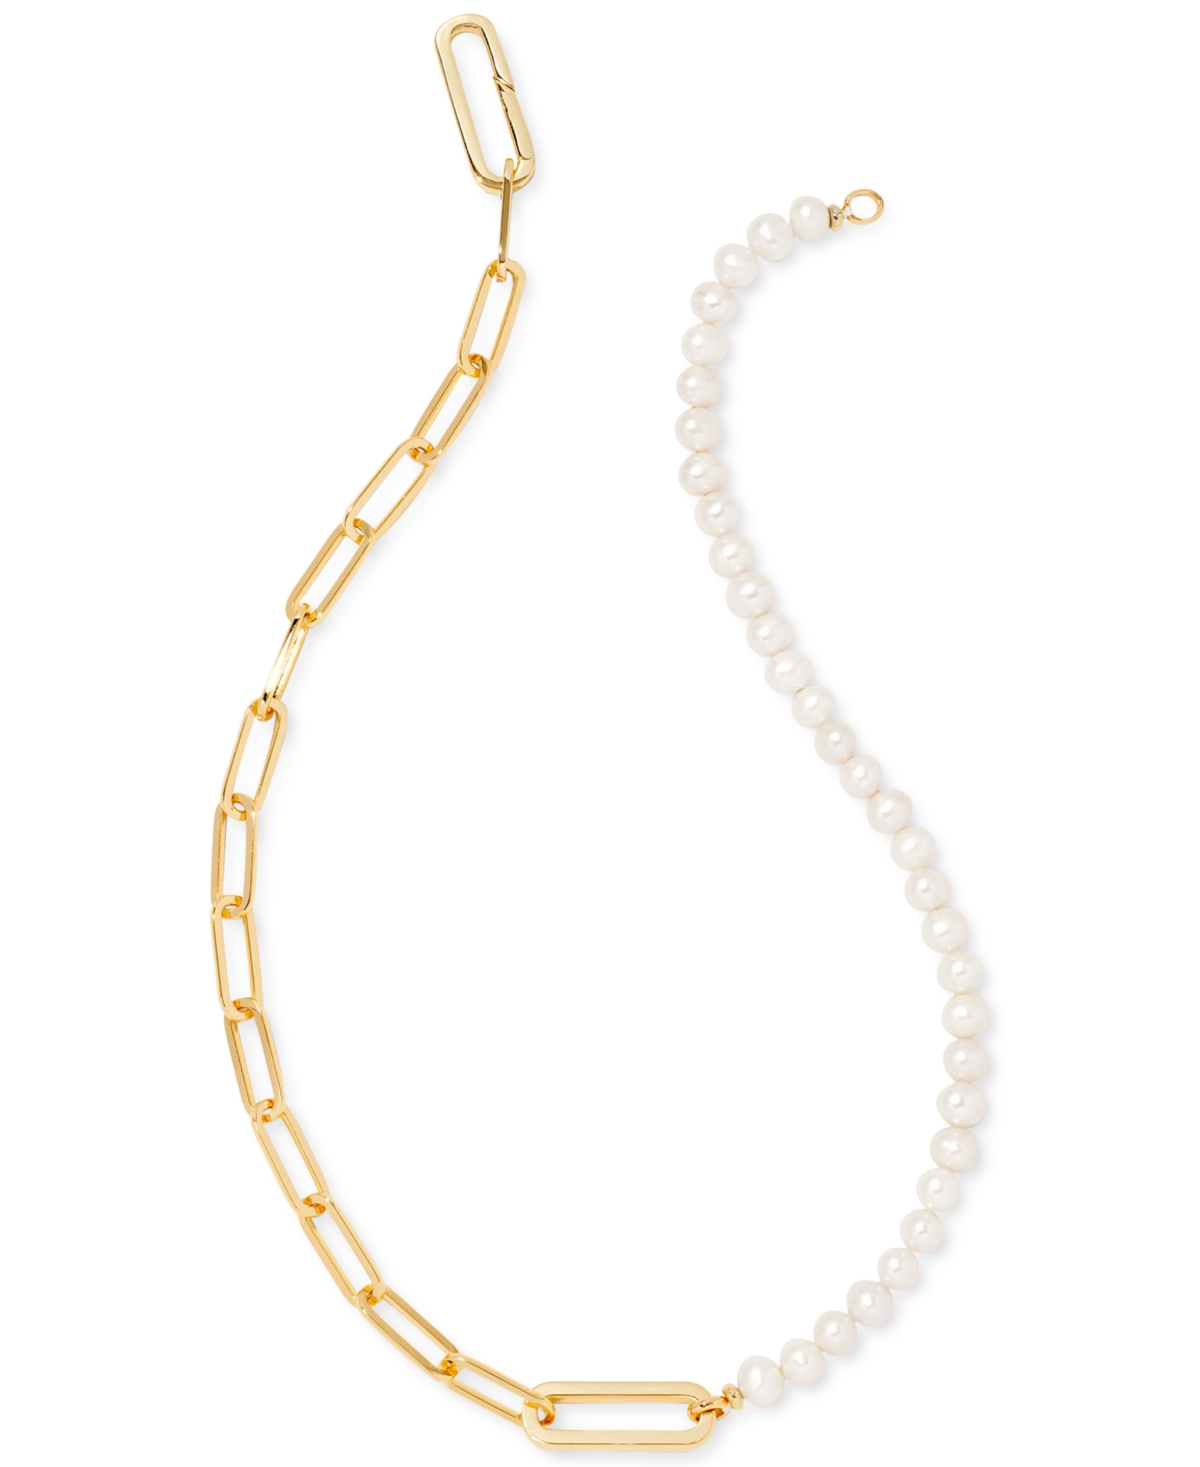 Kendra Scott 14k Gold-plated Cultured Freshwater Pearl (6